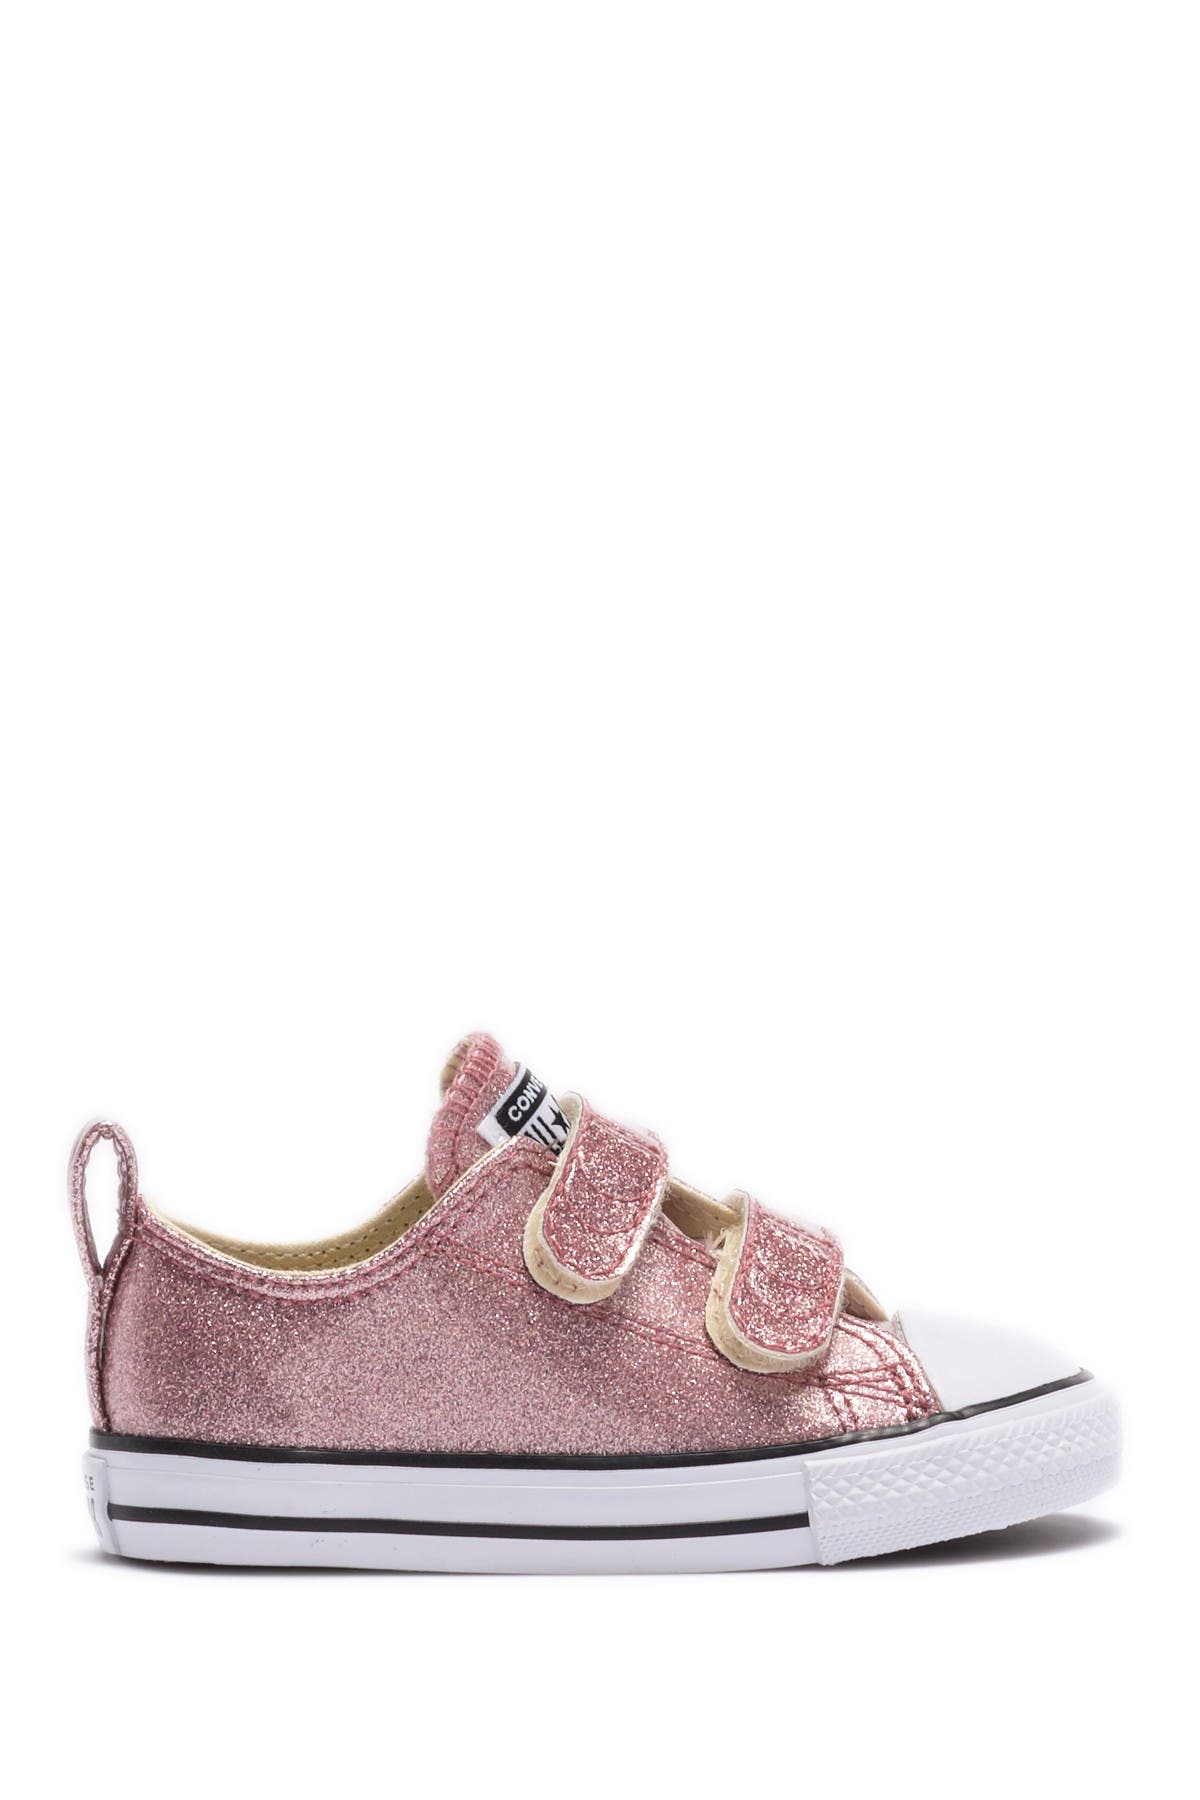 rose gold baby converse